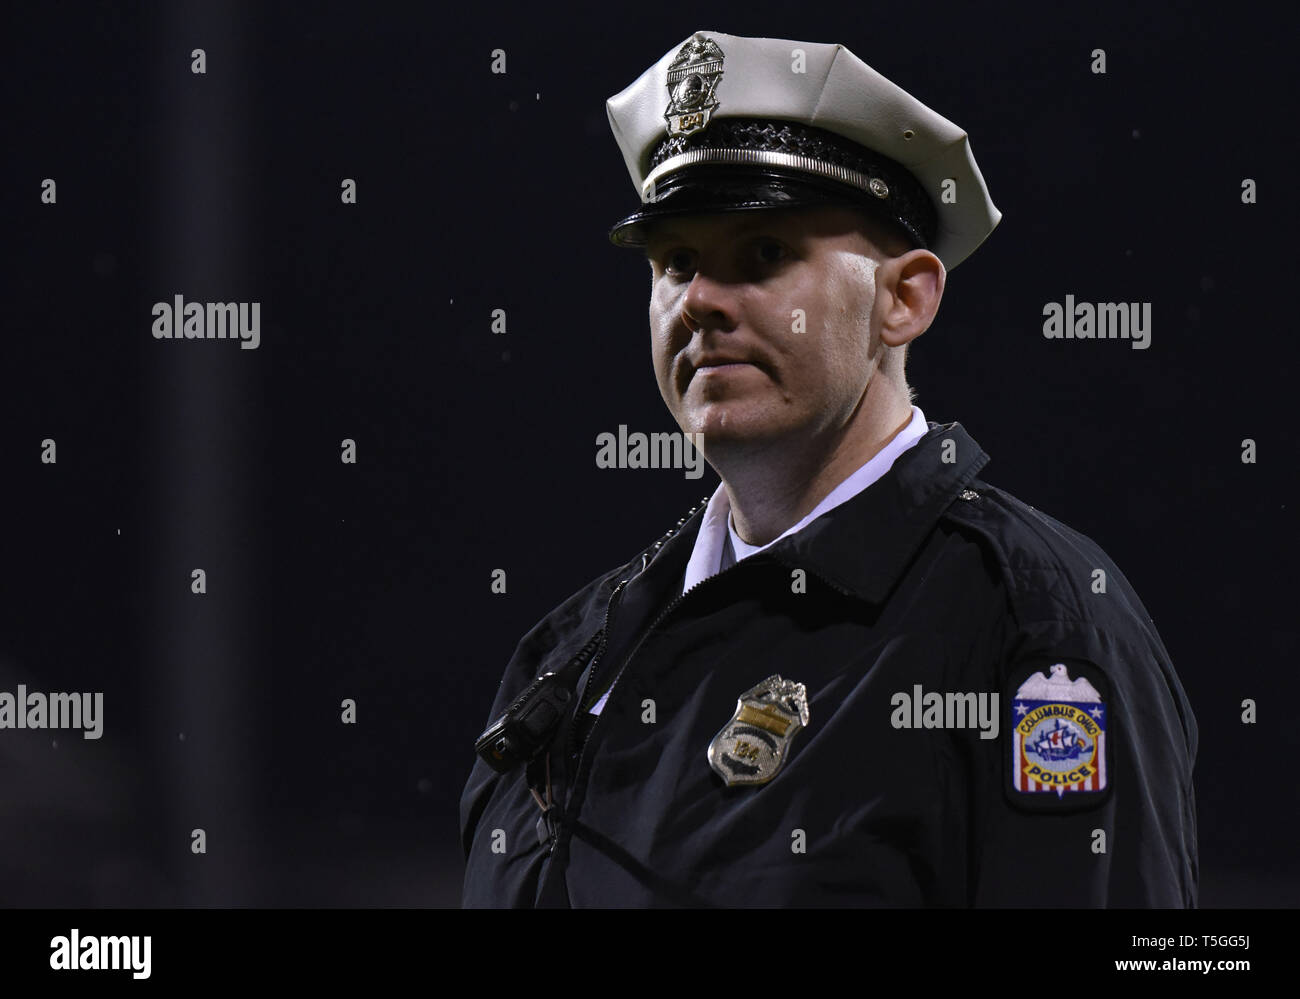 Columbus, OH, USA. 24th Apr, 2019. April 24, 2019: a Columbus Police Officer watches over the players after the MLS match between DC United and Columbus Crew SC at Mapfre Stadium in Columbus, Ohio. Austyn McFadden/ZUMA Credit: Austyn McFadden/ZUMA Wire/Alamy Live News Stock Photo